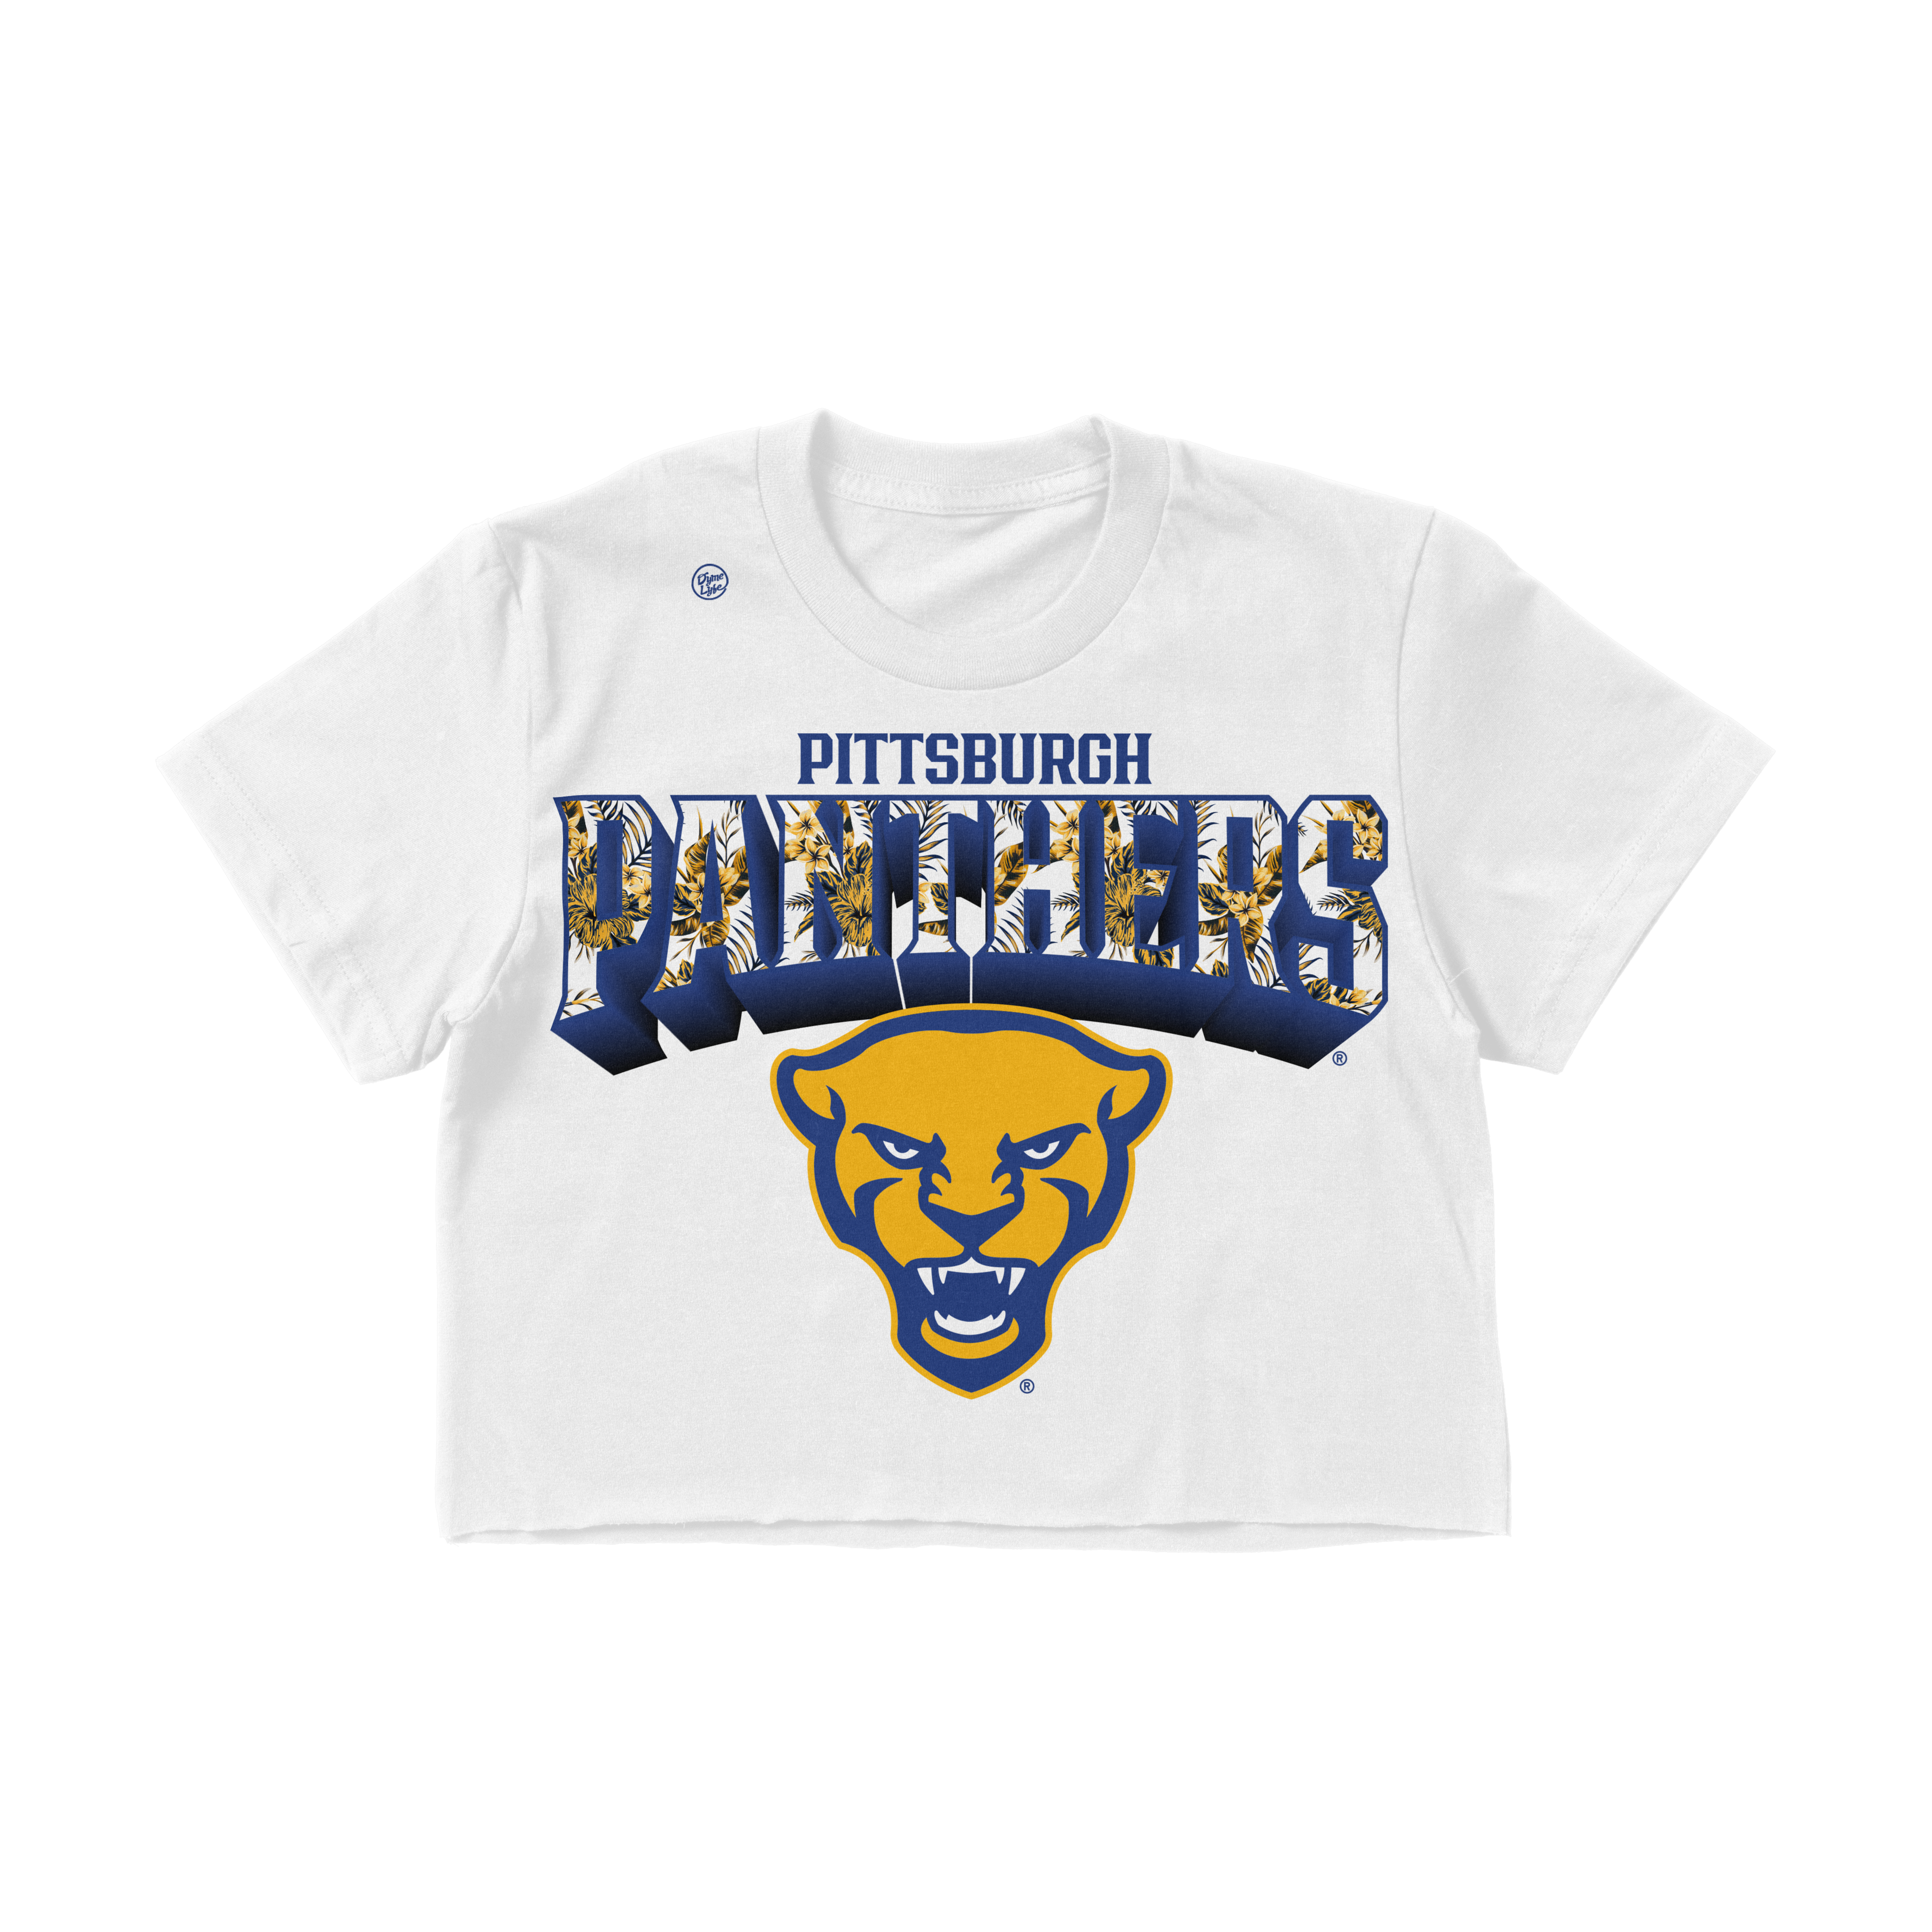 Pittsburgh Panthers Women’s Floral Crop Top